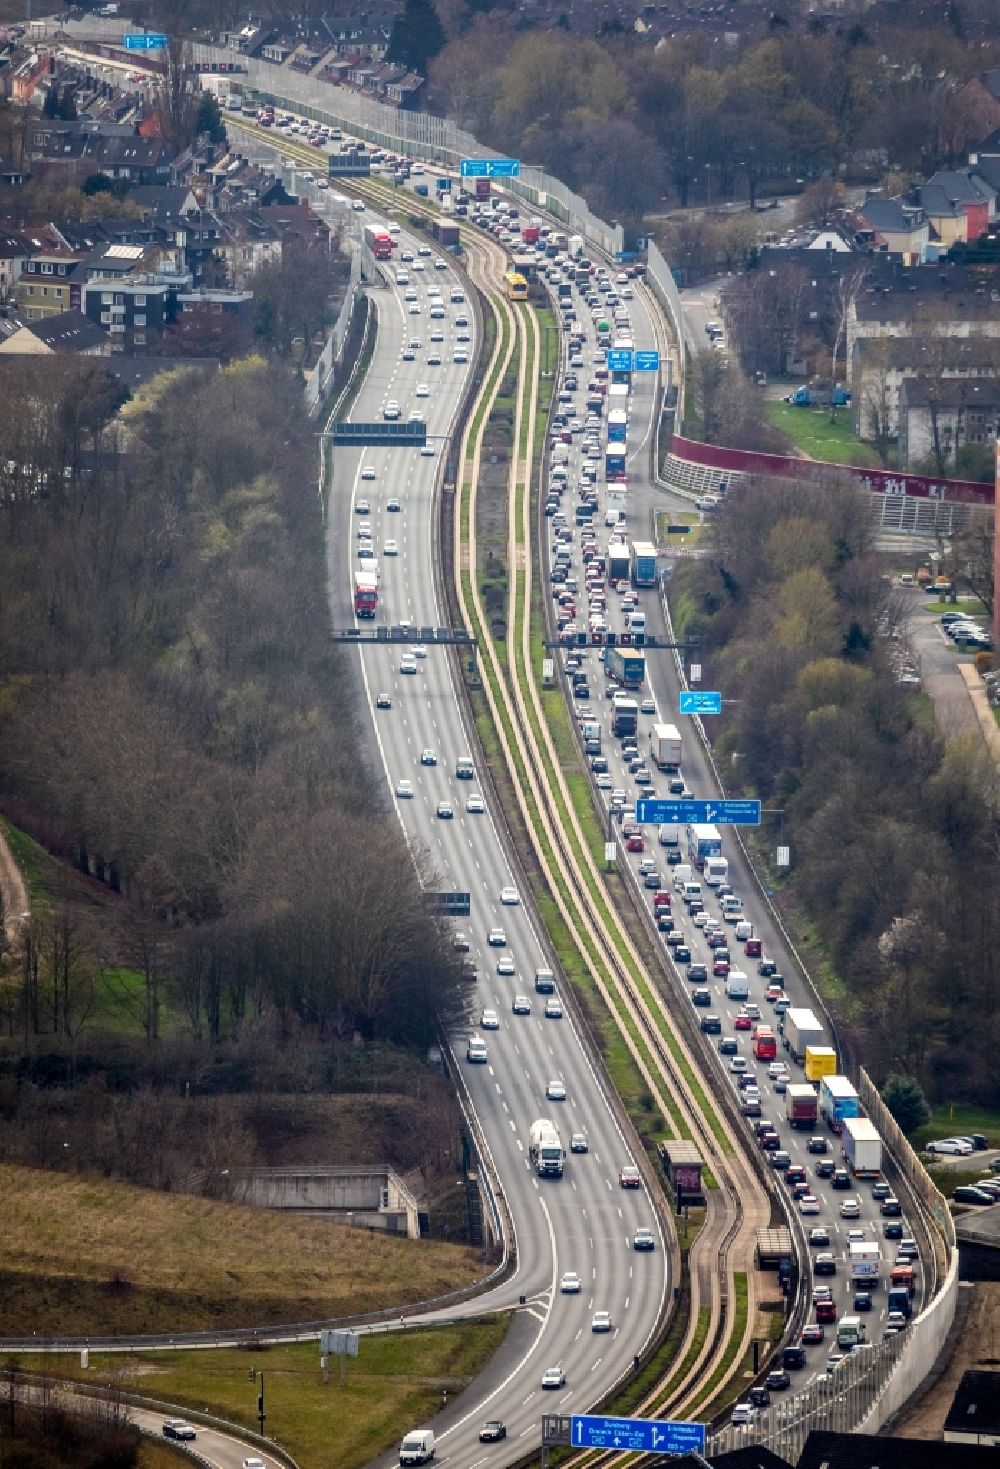 Essen from the bird's eye view: Highway congestion along the route of the lanes BAB A40 - A52 in the district Frillendorf in Essen in the state North Rhine-Westphalia, Germany